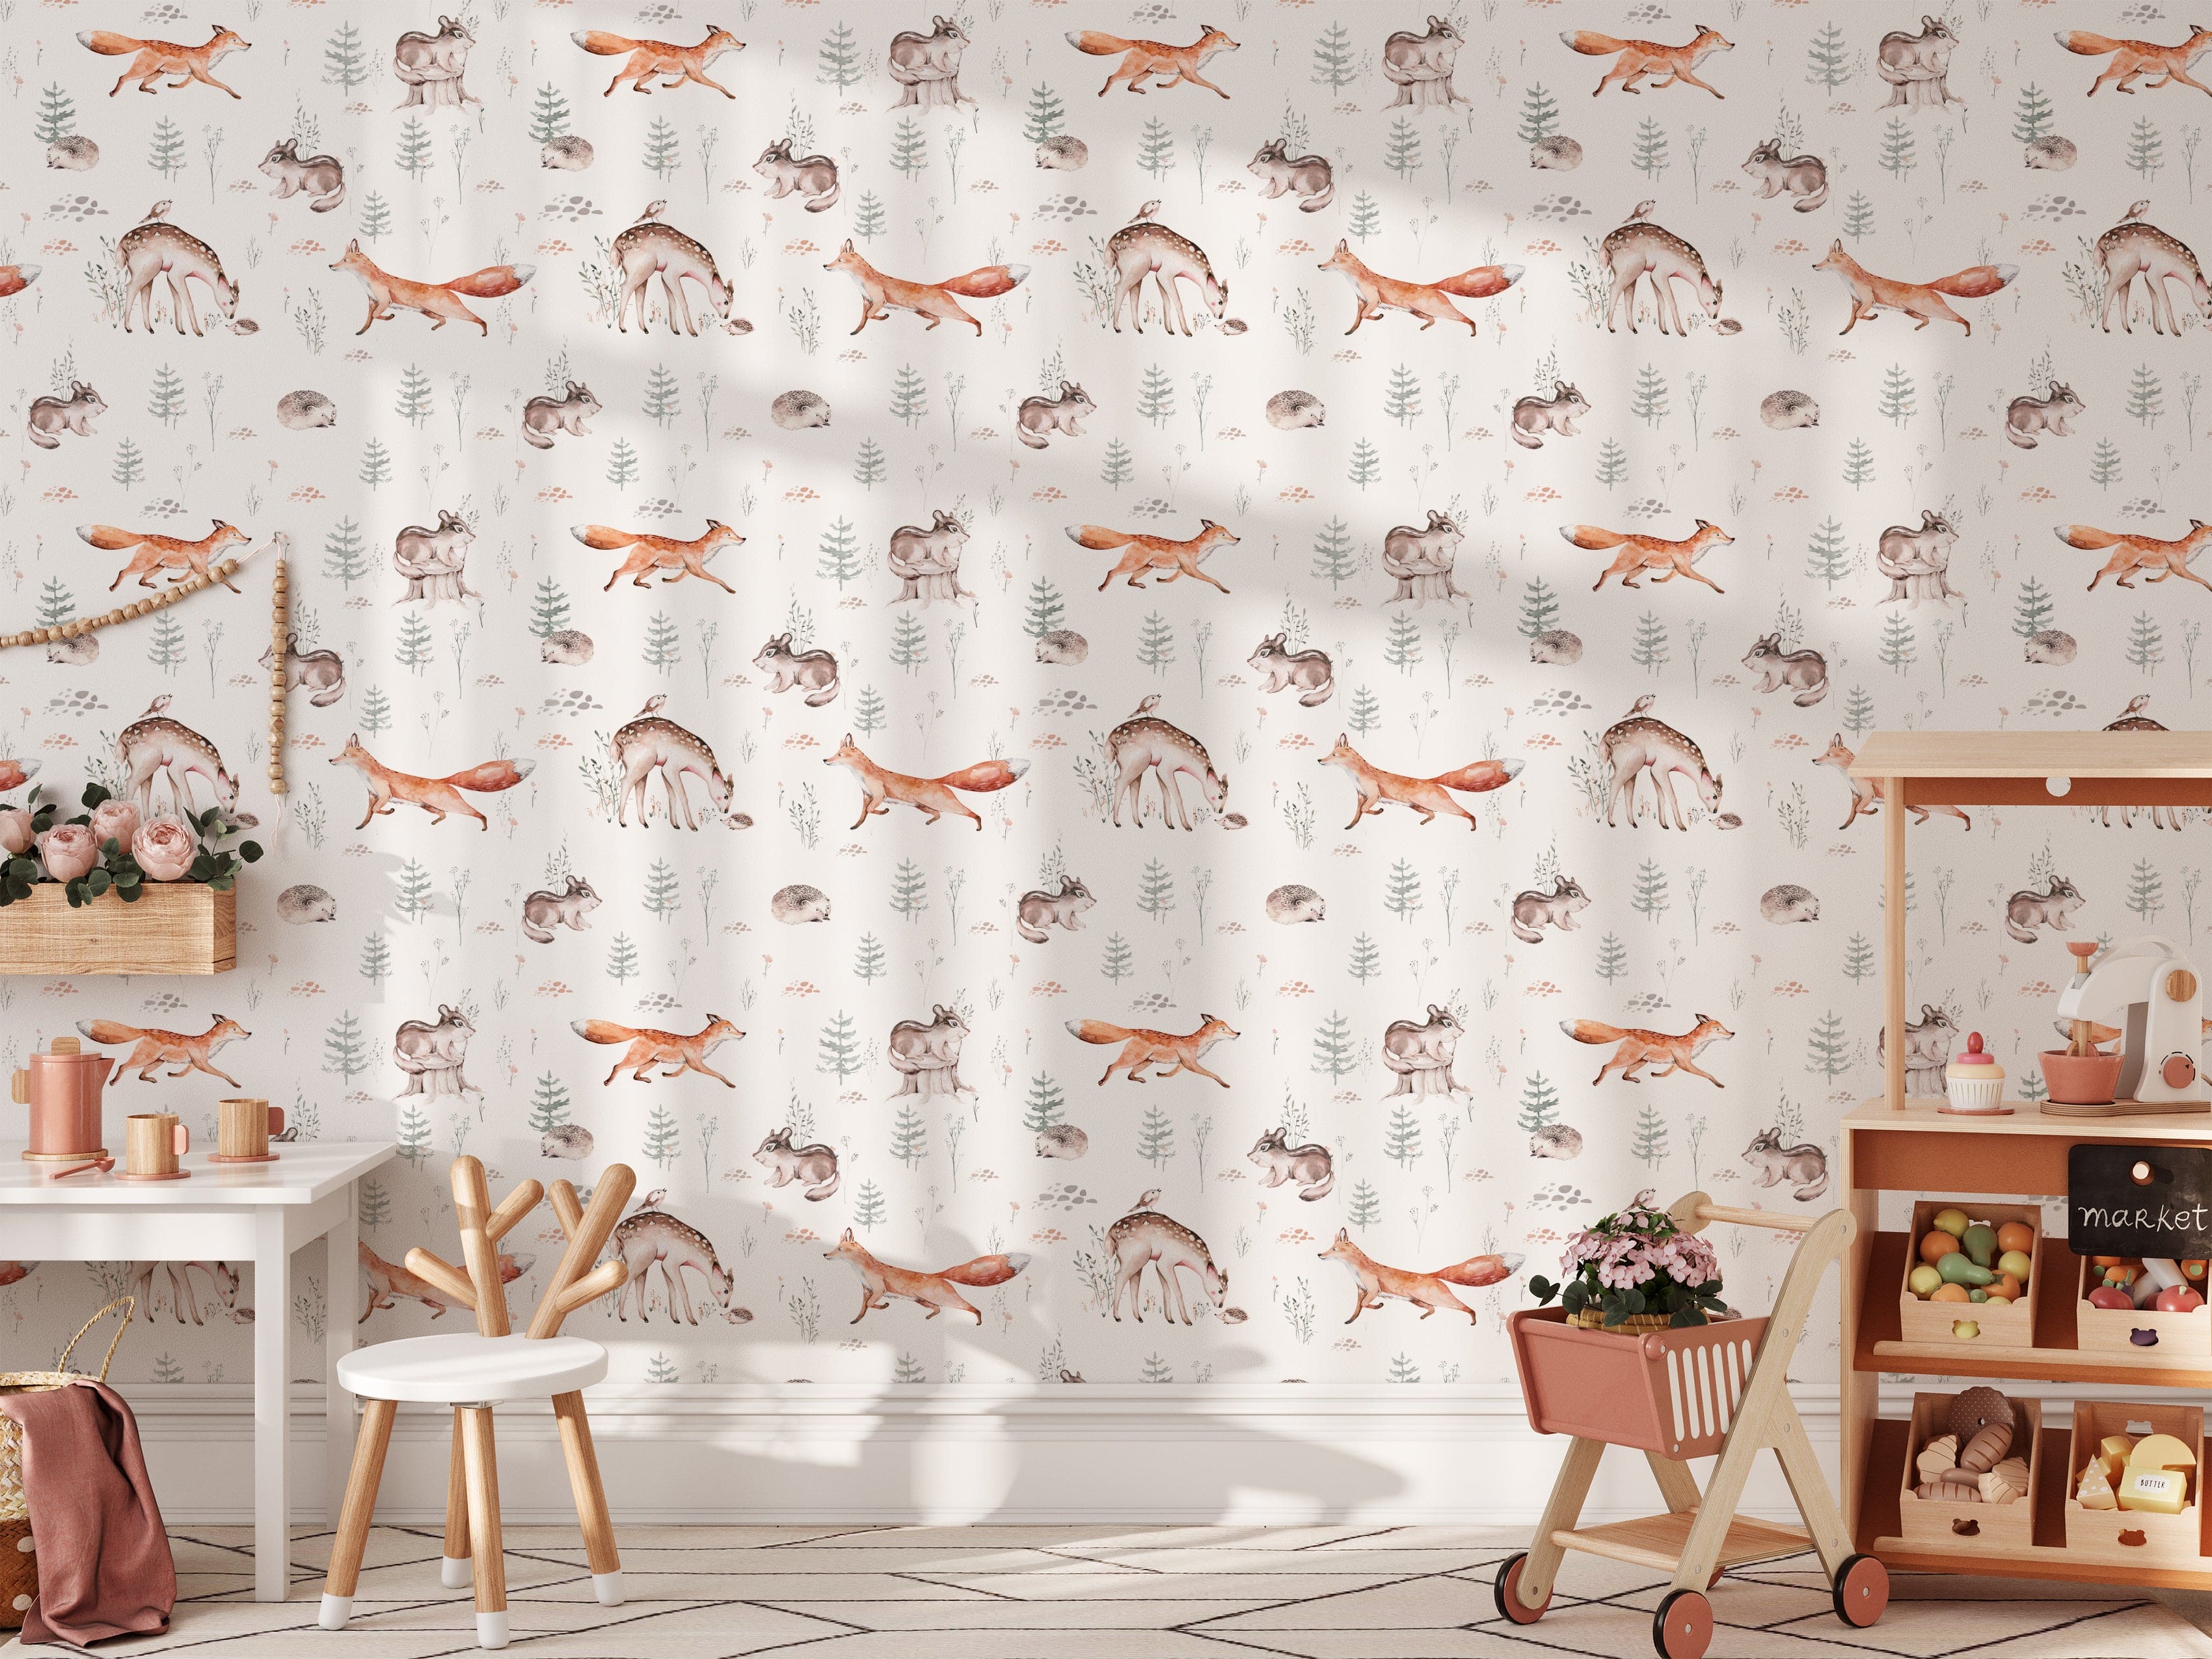 A delightful children's playroom decorated with Woodland Wonder Wallpaper featuring charming illustrations of forest animals such as foxes, deer, rabbits, and hedgehogs amidst trees and foliage. The scene is complemented by a kid-friendly desk and chair set, a toy cart, and vibrant room decor.